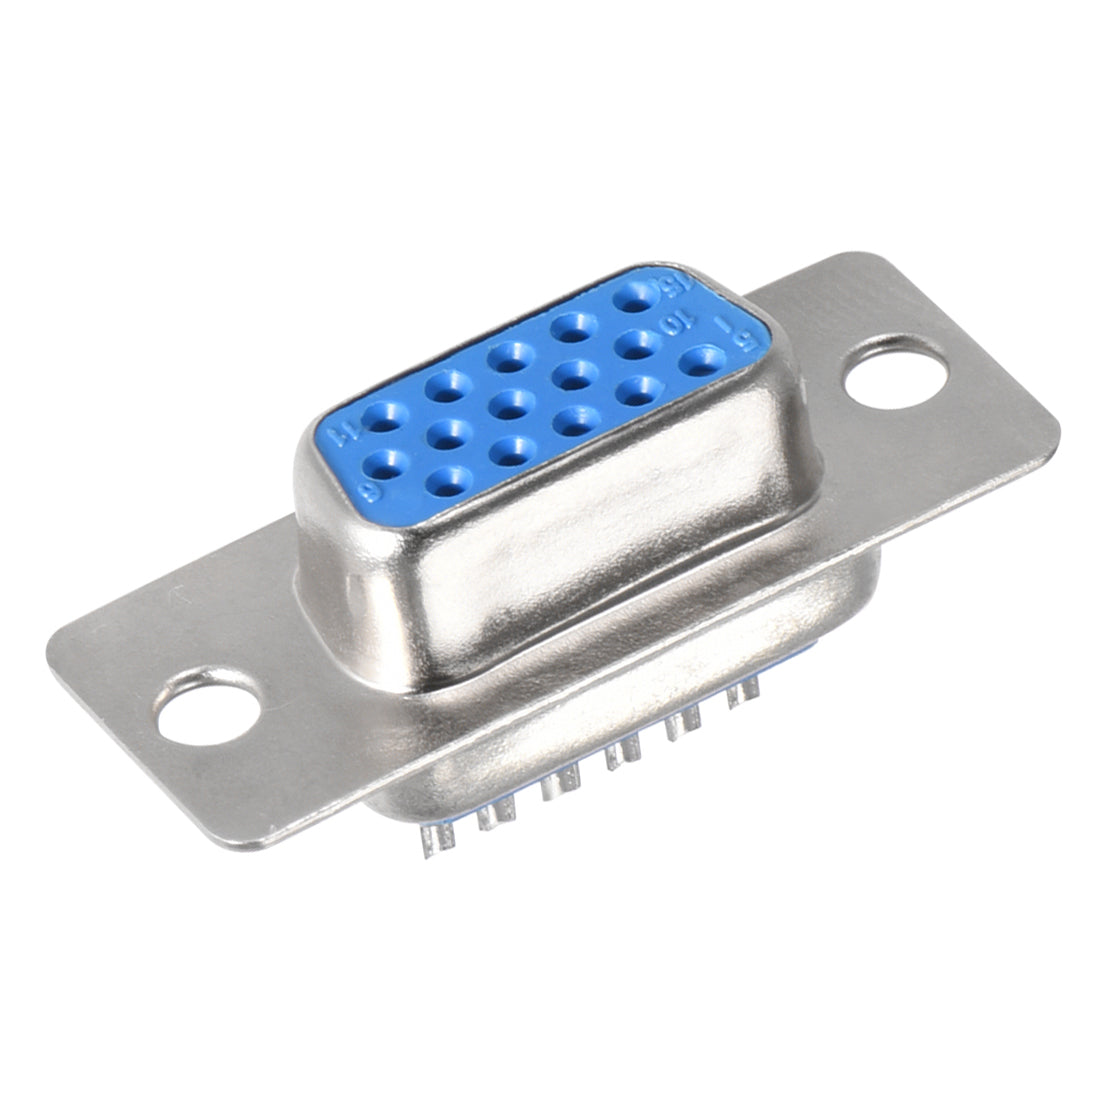 uxcell Uxcell D-sub Connector Female Socket 15-pin 3-row Port Terminal Breakout for Mechanical Equipment CNC Computers 1pc